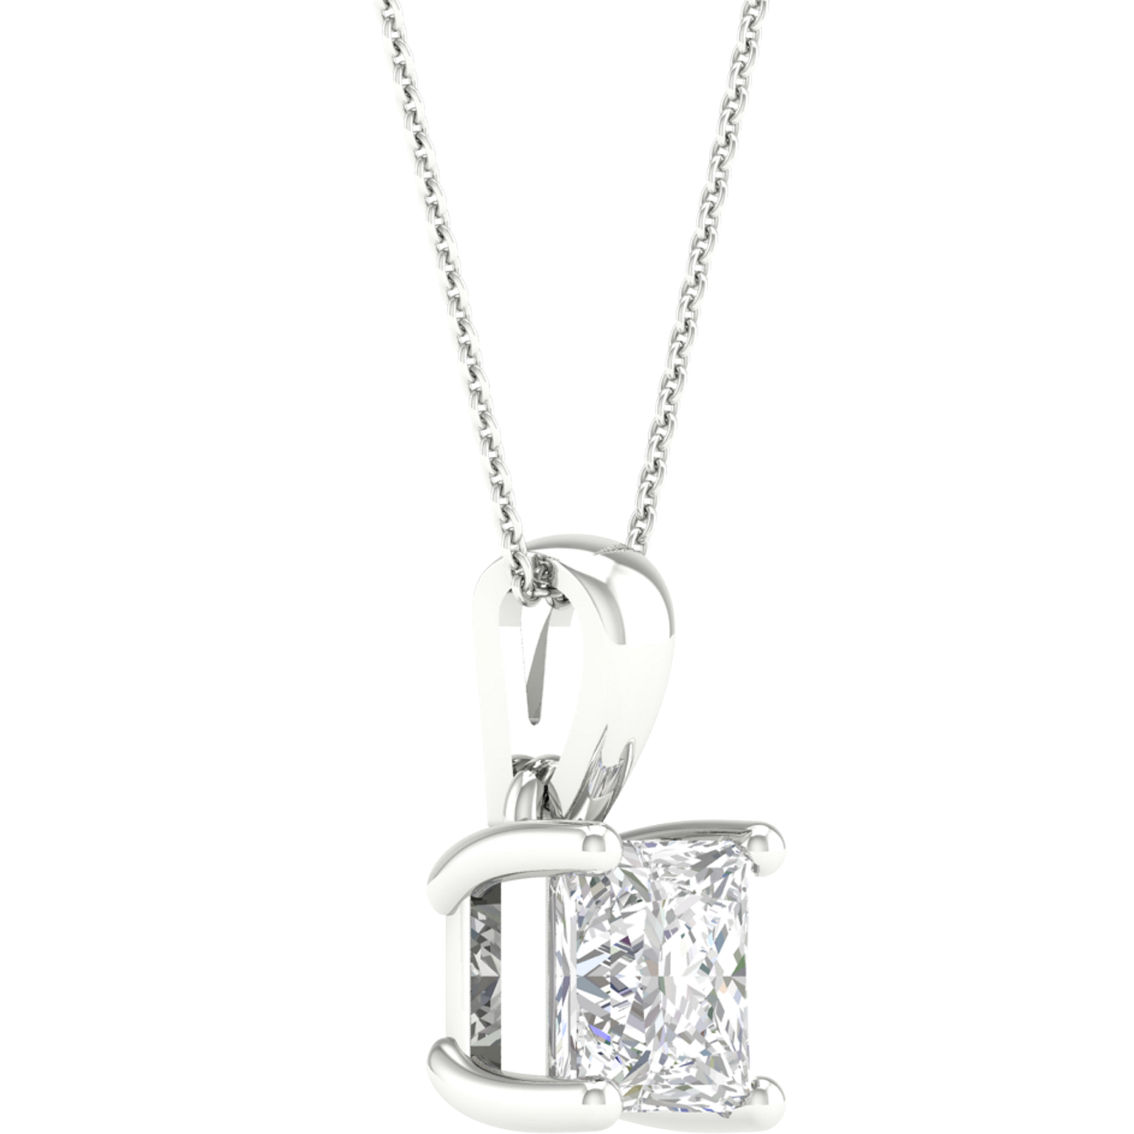 Pure Brilliance 14K White Gold 1/2 CTW Solitaire Pendant with IGI Certification - Image 2 of 2